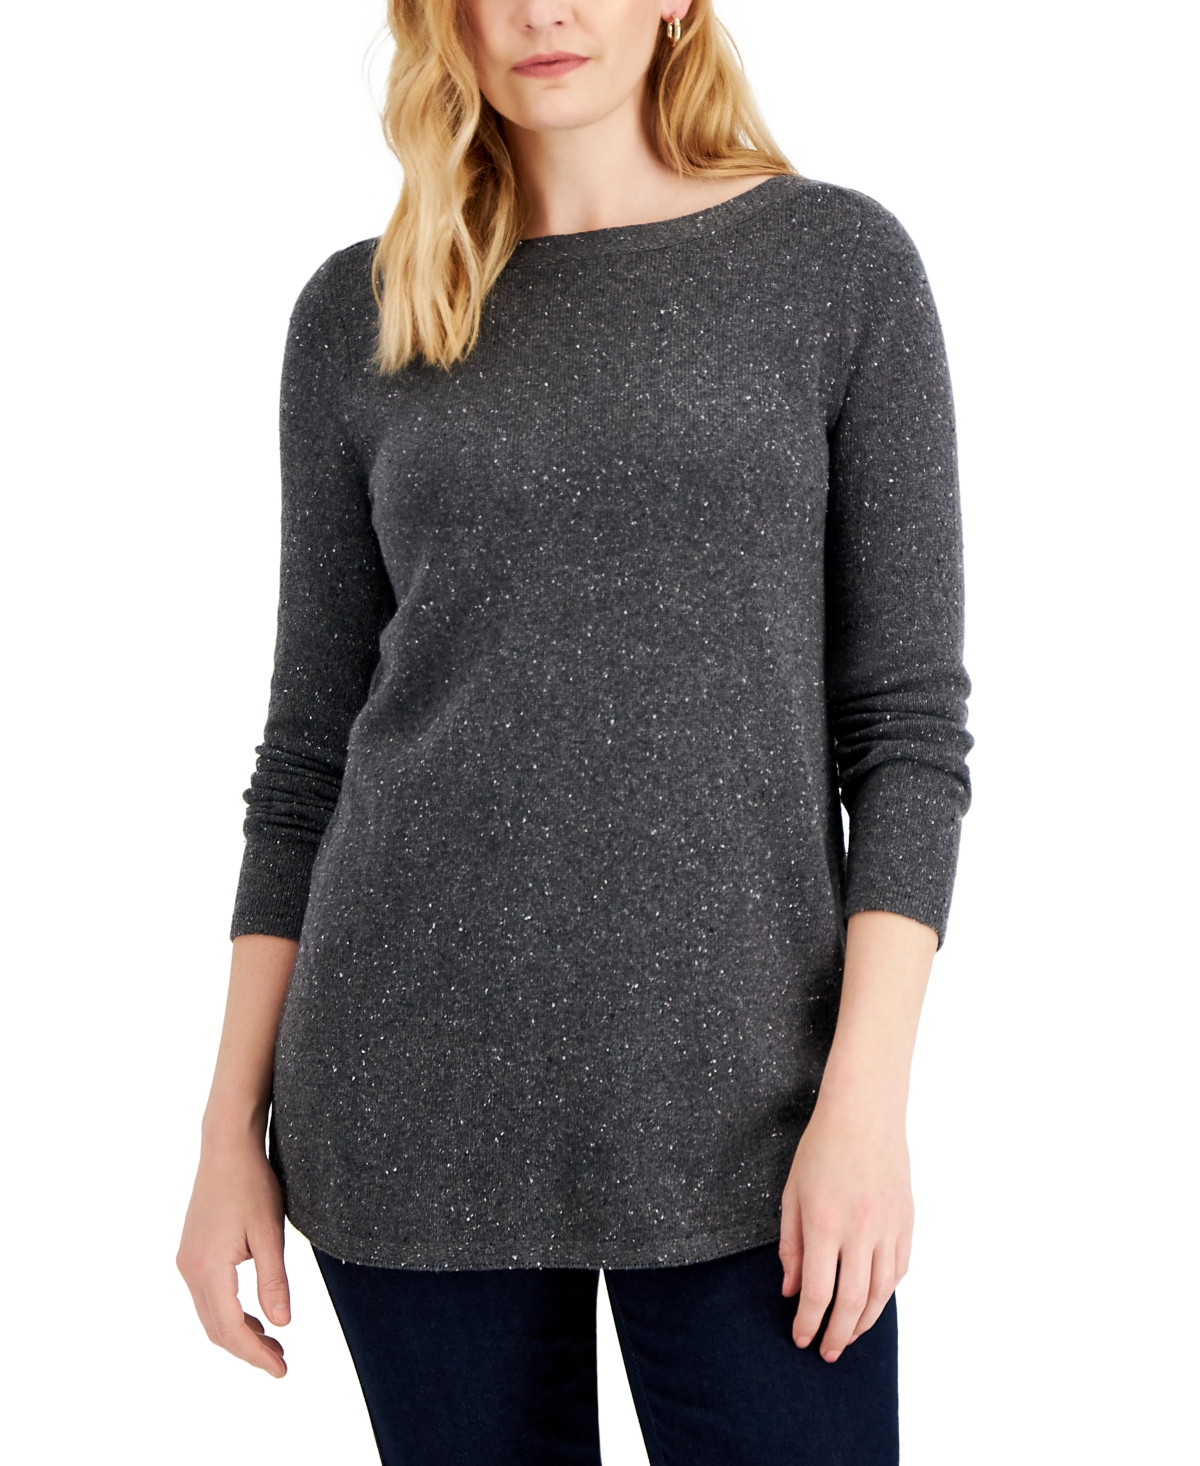 Women's Ballet-Neck Tunic Sweater, Created for Macy's - Charcoal Heather